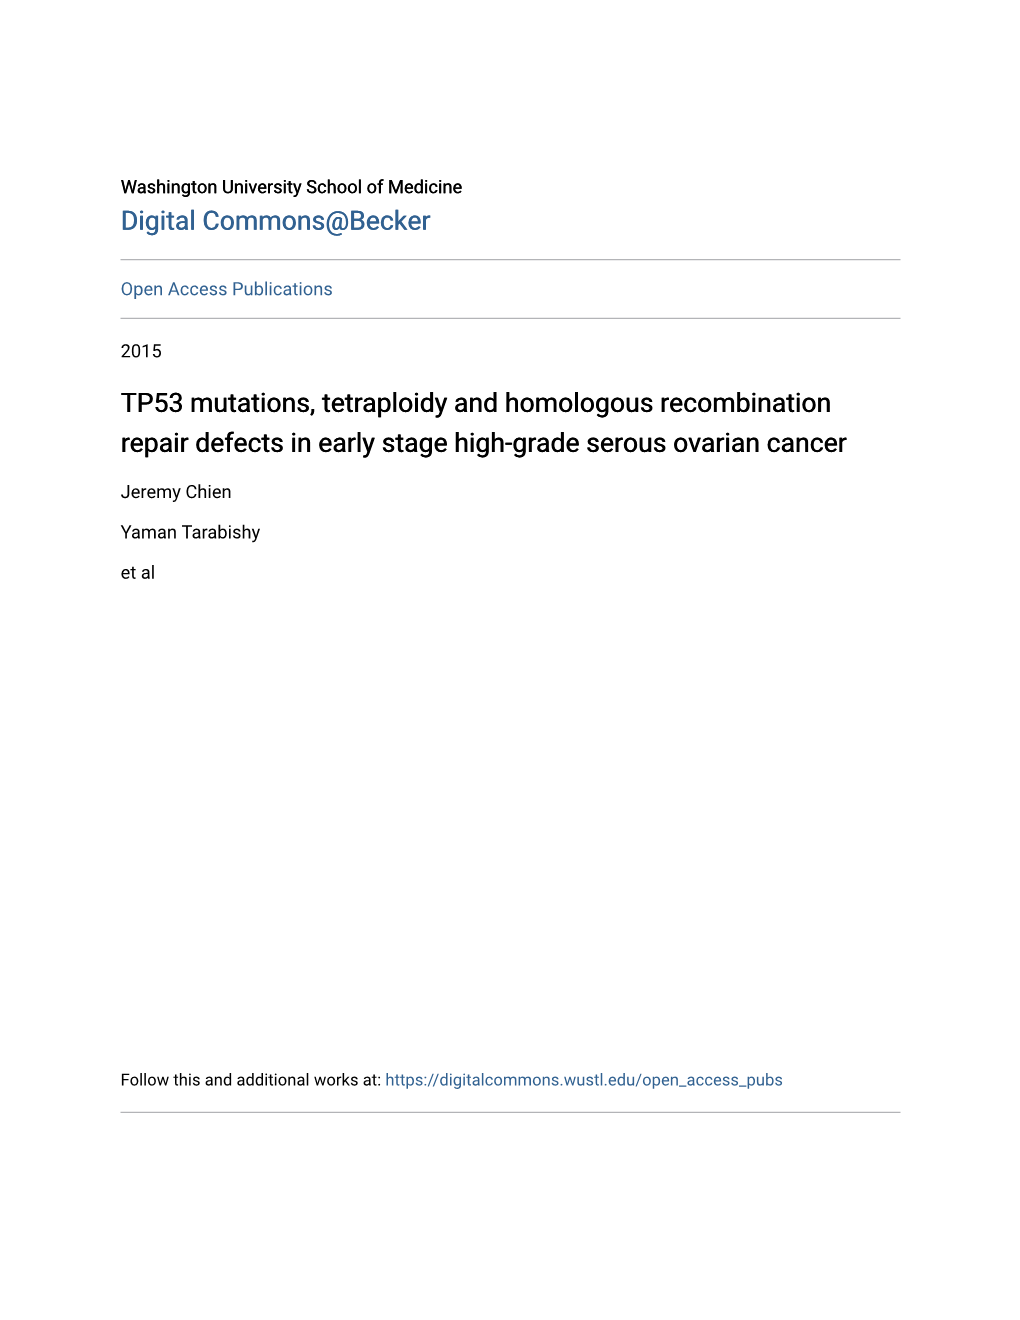 TP53 Mutations, Tetraploidy and Homologous Recombination Repair Defects in Early Stage High-Grade Serous Ovarian Cancer